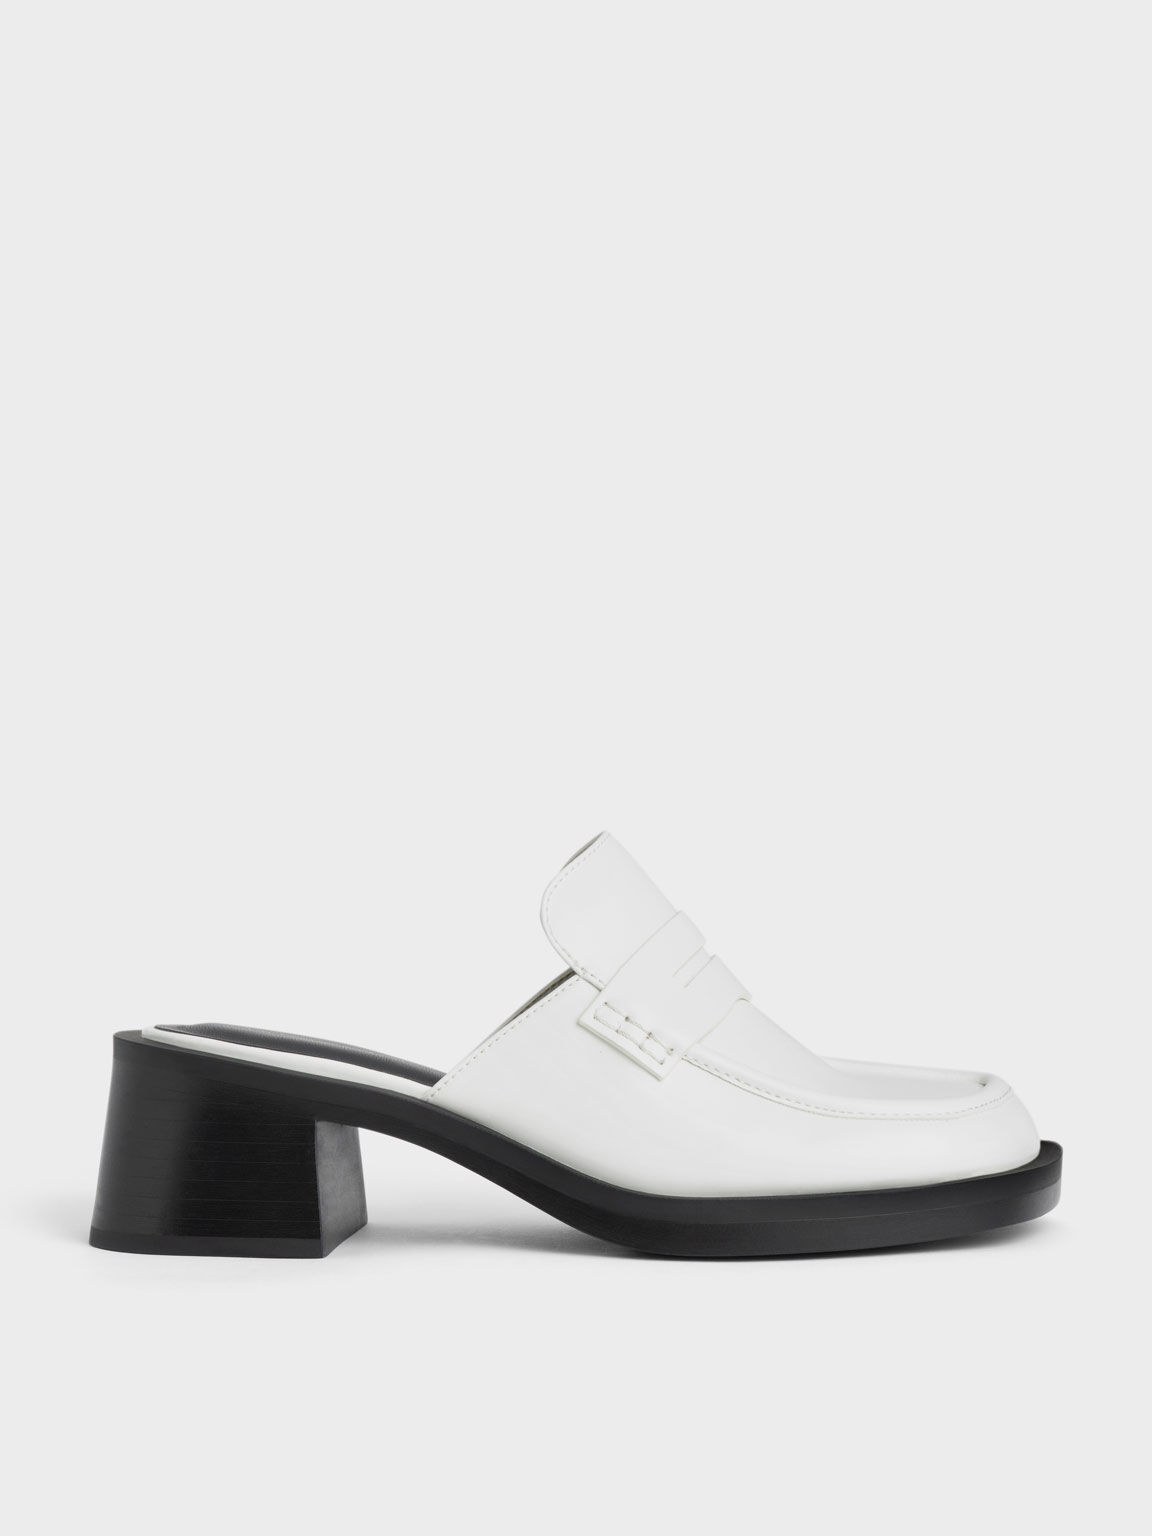 Penny Loafer Block Heel Mules, White, hi-res